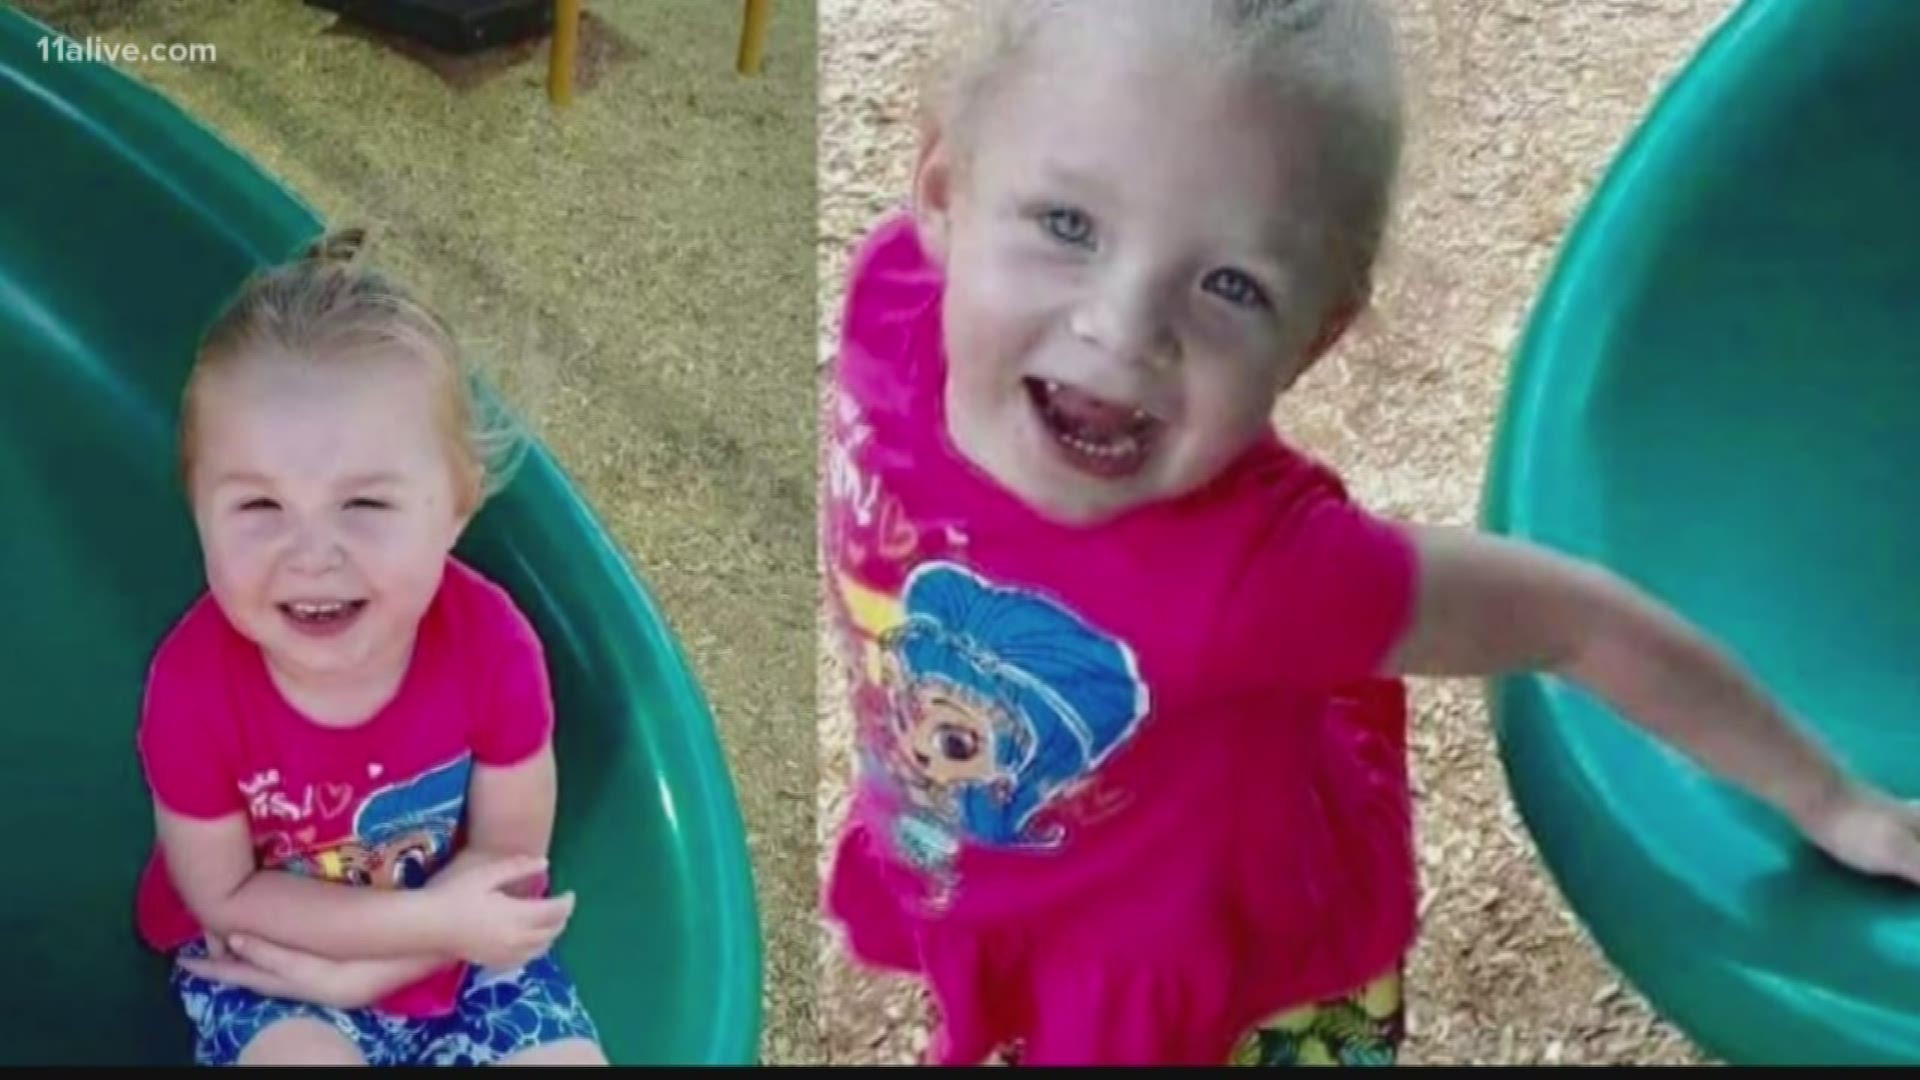 The high temperature for that day was 92 degrees. Police said 3-year-old Payton and Raelynn Keyes had been missing for hours.